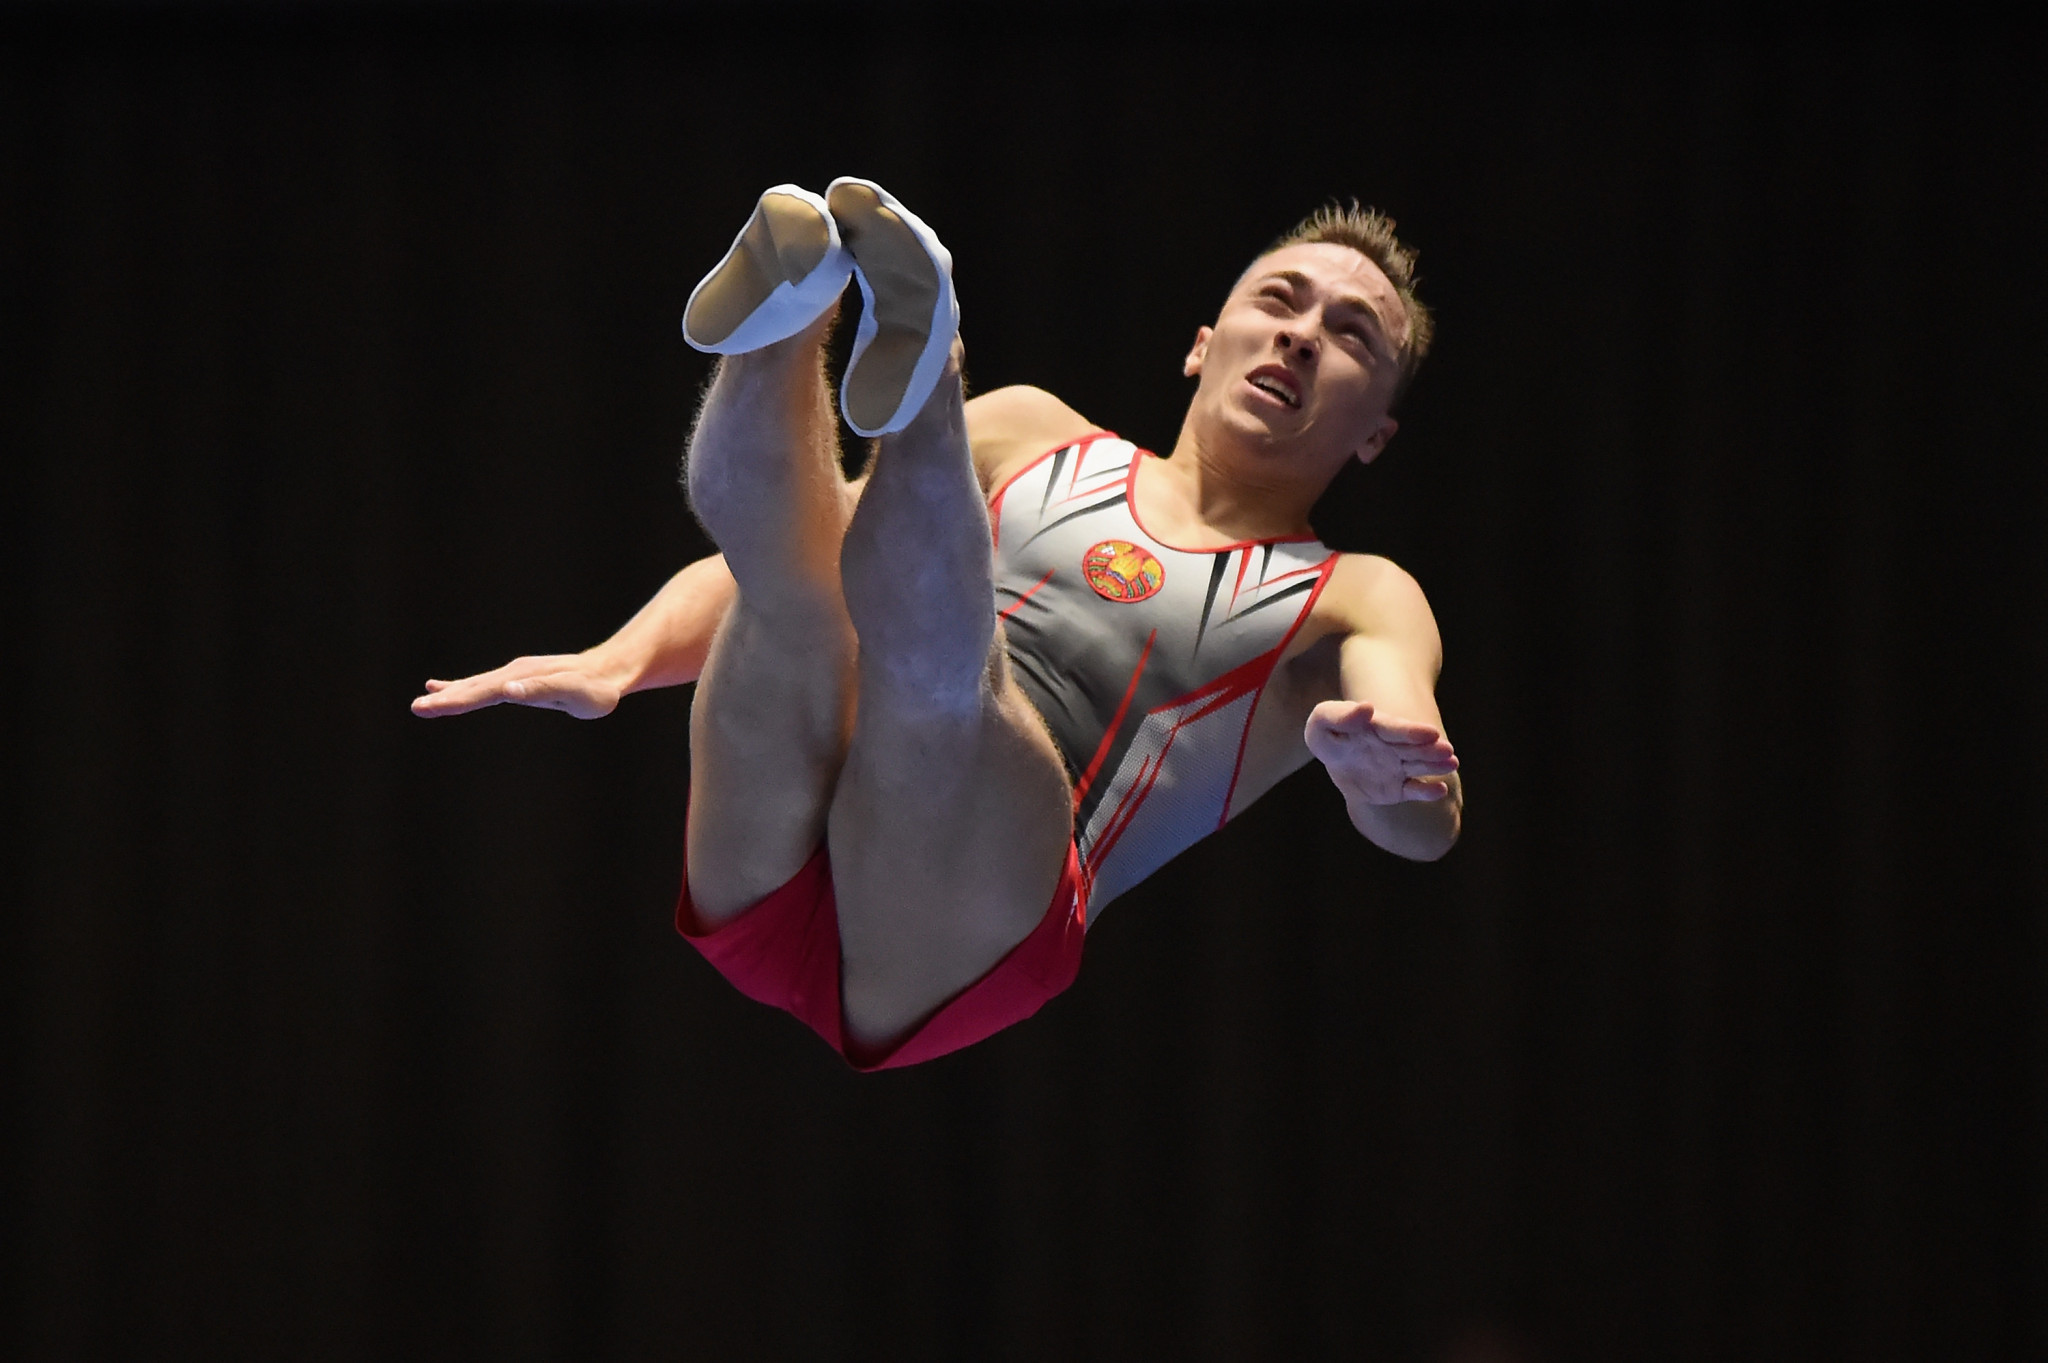 Belarus' Olympic individual champion Uladzislau Hancharou was beaten at the FIG Trampoline World Cup in Minsk ©Getty Images